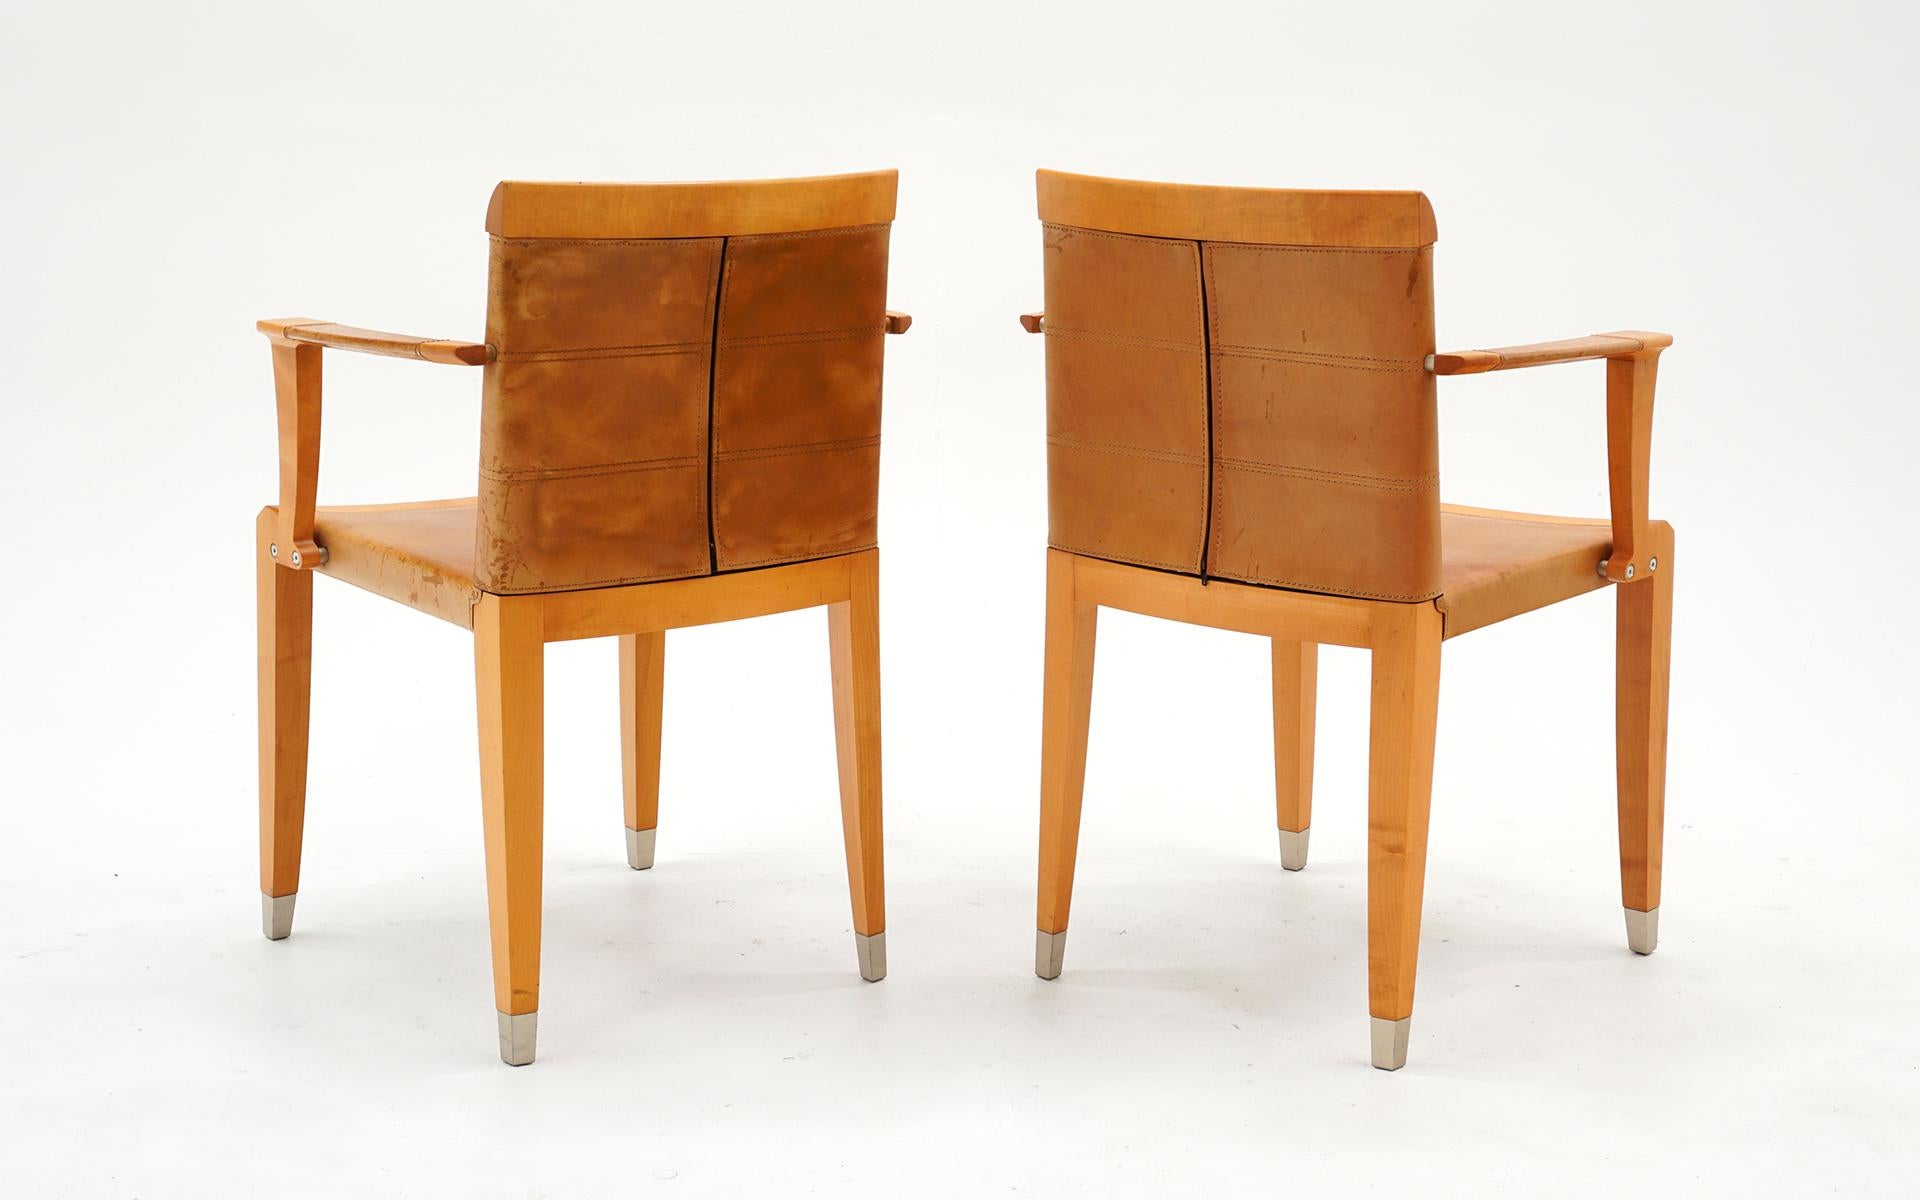 Set of 6 dining chairs by Giorgetti, Italy. Tan leather and beechwood frames. Prices to sell.

Armchair dimensions:
D 20 inches x W 23.25 inches x H 32 inches x seat height 18.25 inches.